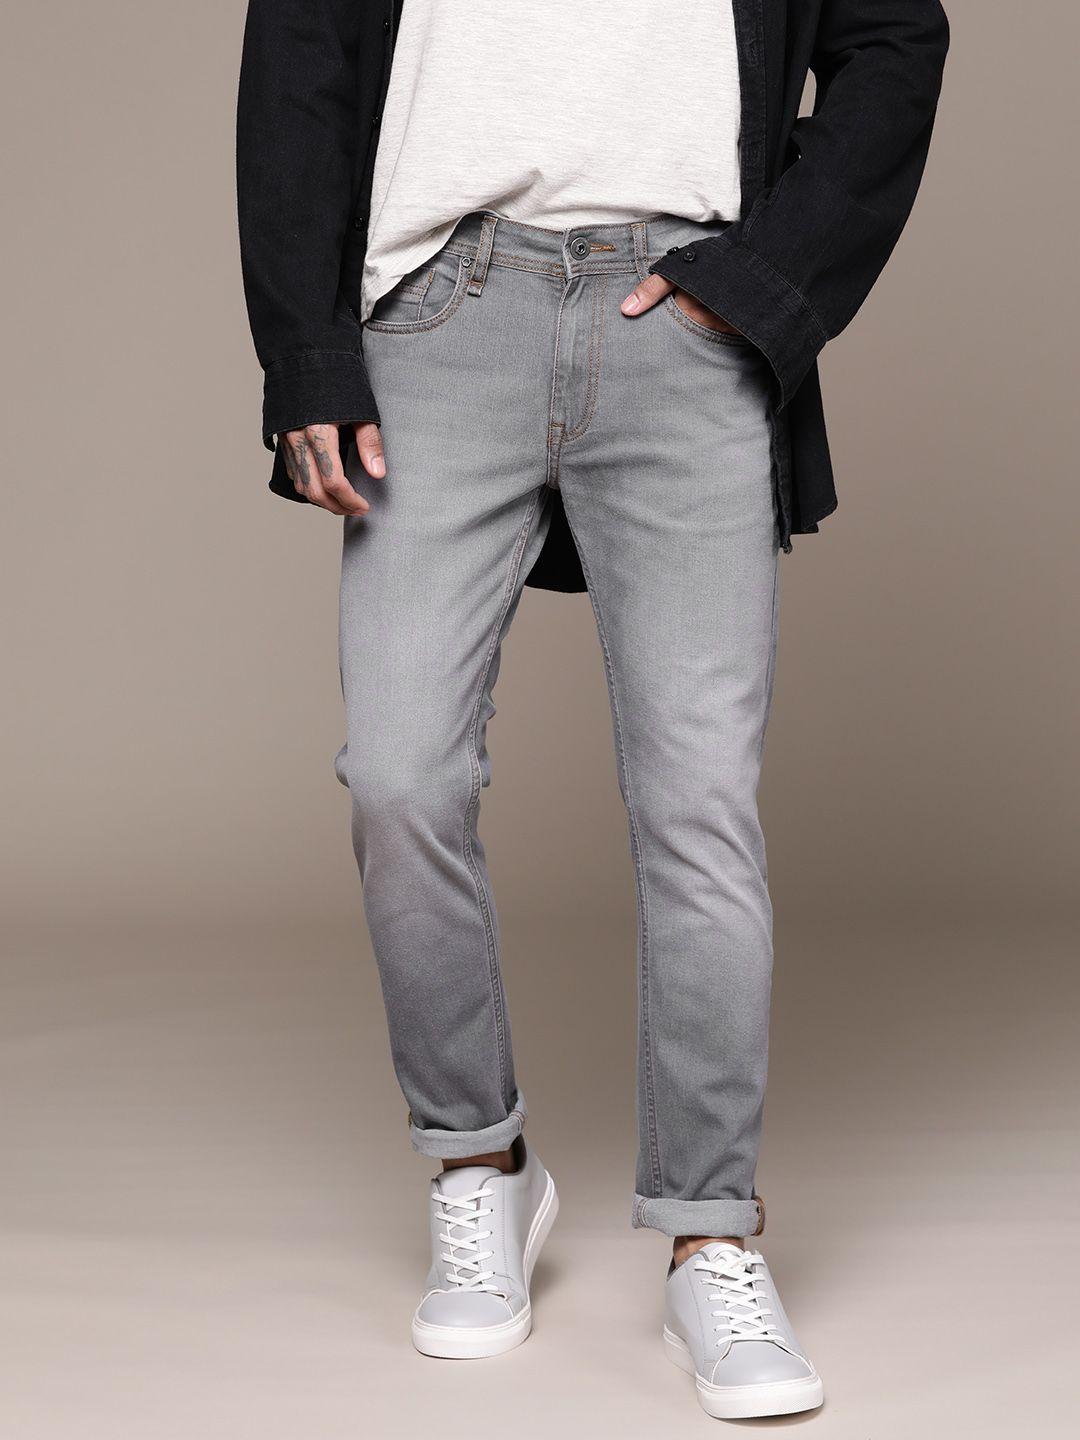 the-roadster-lifestyle-co.-men-slim-tapered-fit-light-fade-stretchable-jeans